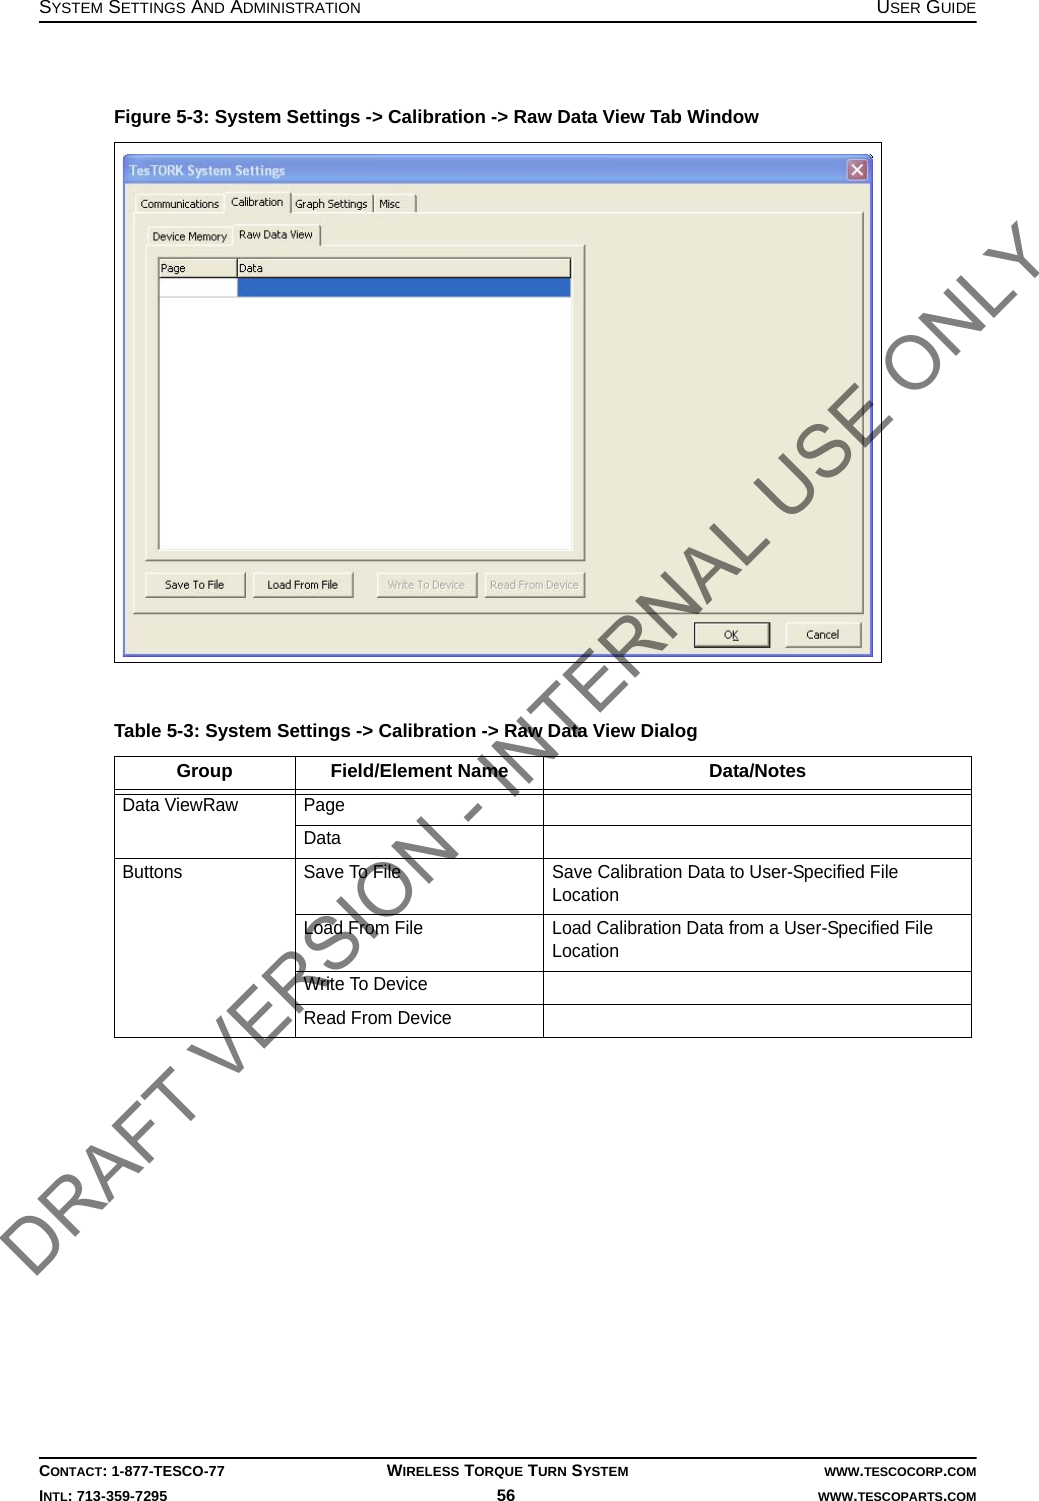 SYSTEM SETTINGS AND ADMINISTRATION USER GUIDECONTACT: 1-877-TESCO-77 WIRELESS TORQUE TURN SYSTEM WWW.TESCOCORP.COMINTL: 713-359-7295 56    WWW.TESCOPARTS.COMFigure 5-3: System Settings -&gt; Calibration -&gt; Raw Data View Tab WindowTable 5-3: System Settings -&gt; Calibration -&gt; Raw Data View Dialog Group Field/Element Name Data/NotesData ViewRaw PageDataButtons Save To File Save Calibration Data to User-Specified File LocationLoad From File Load Calibration Data from a User-Specified File LocationWrite To DeviceRead From DeviceDRAFT VERSION - INTERNAL USE ONLY